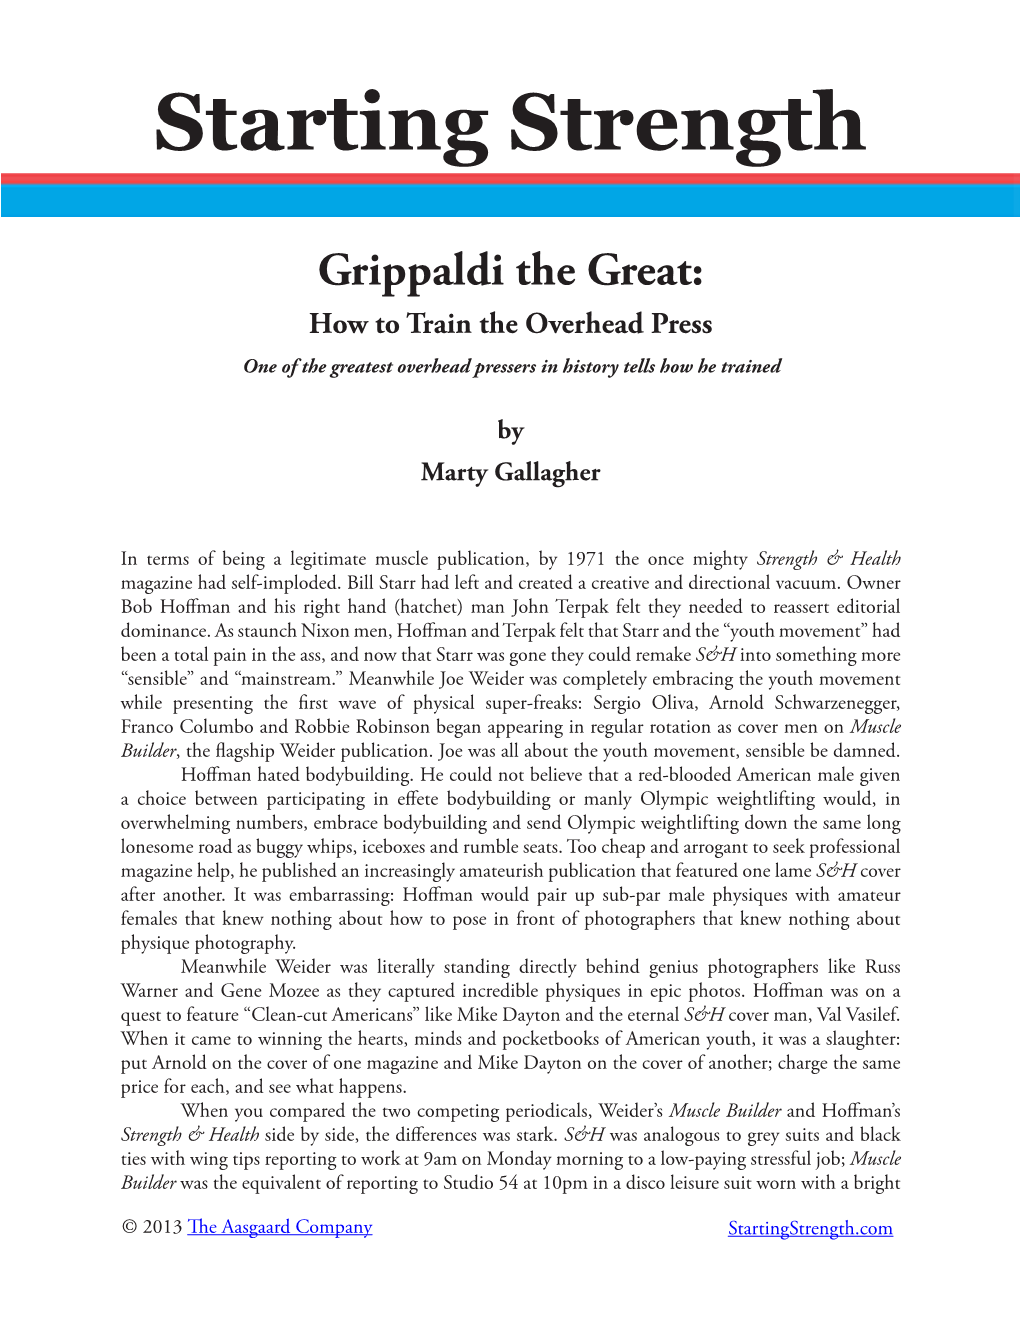 Grippaldi the Great: How to Train the Overhead Press One of the Greatest Overhead Pressers in History Tells How He Trained